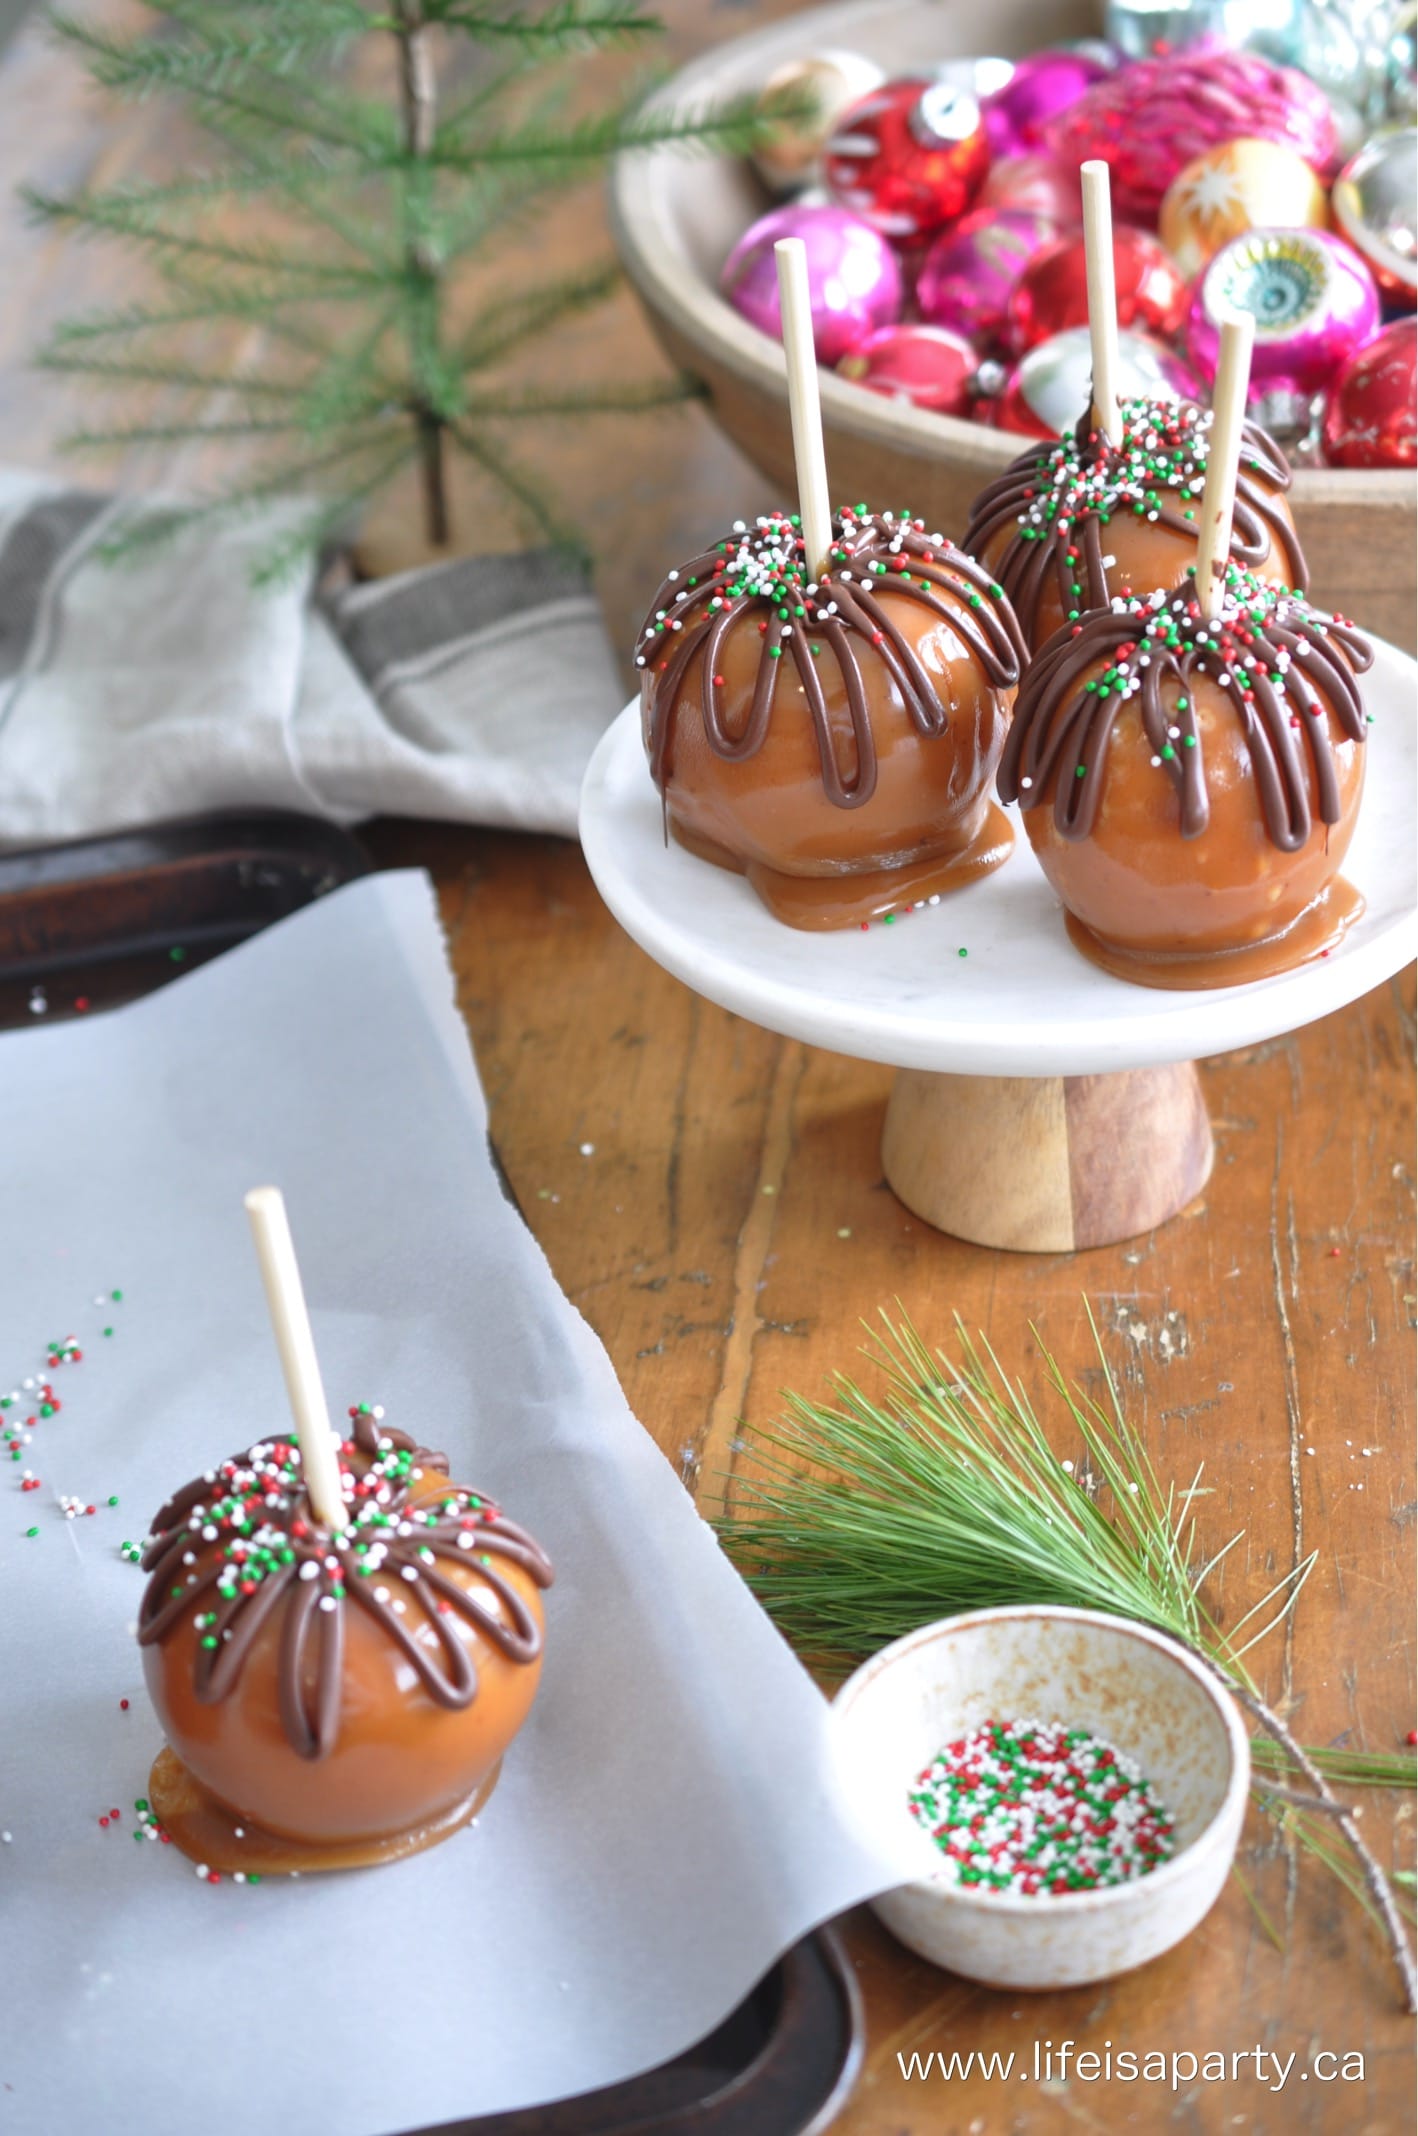 Home Made Caramel Apple Recipes for christmas gift giving